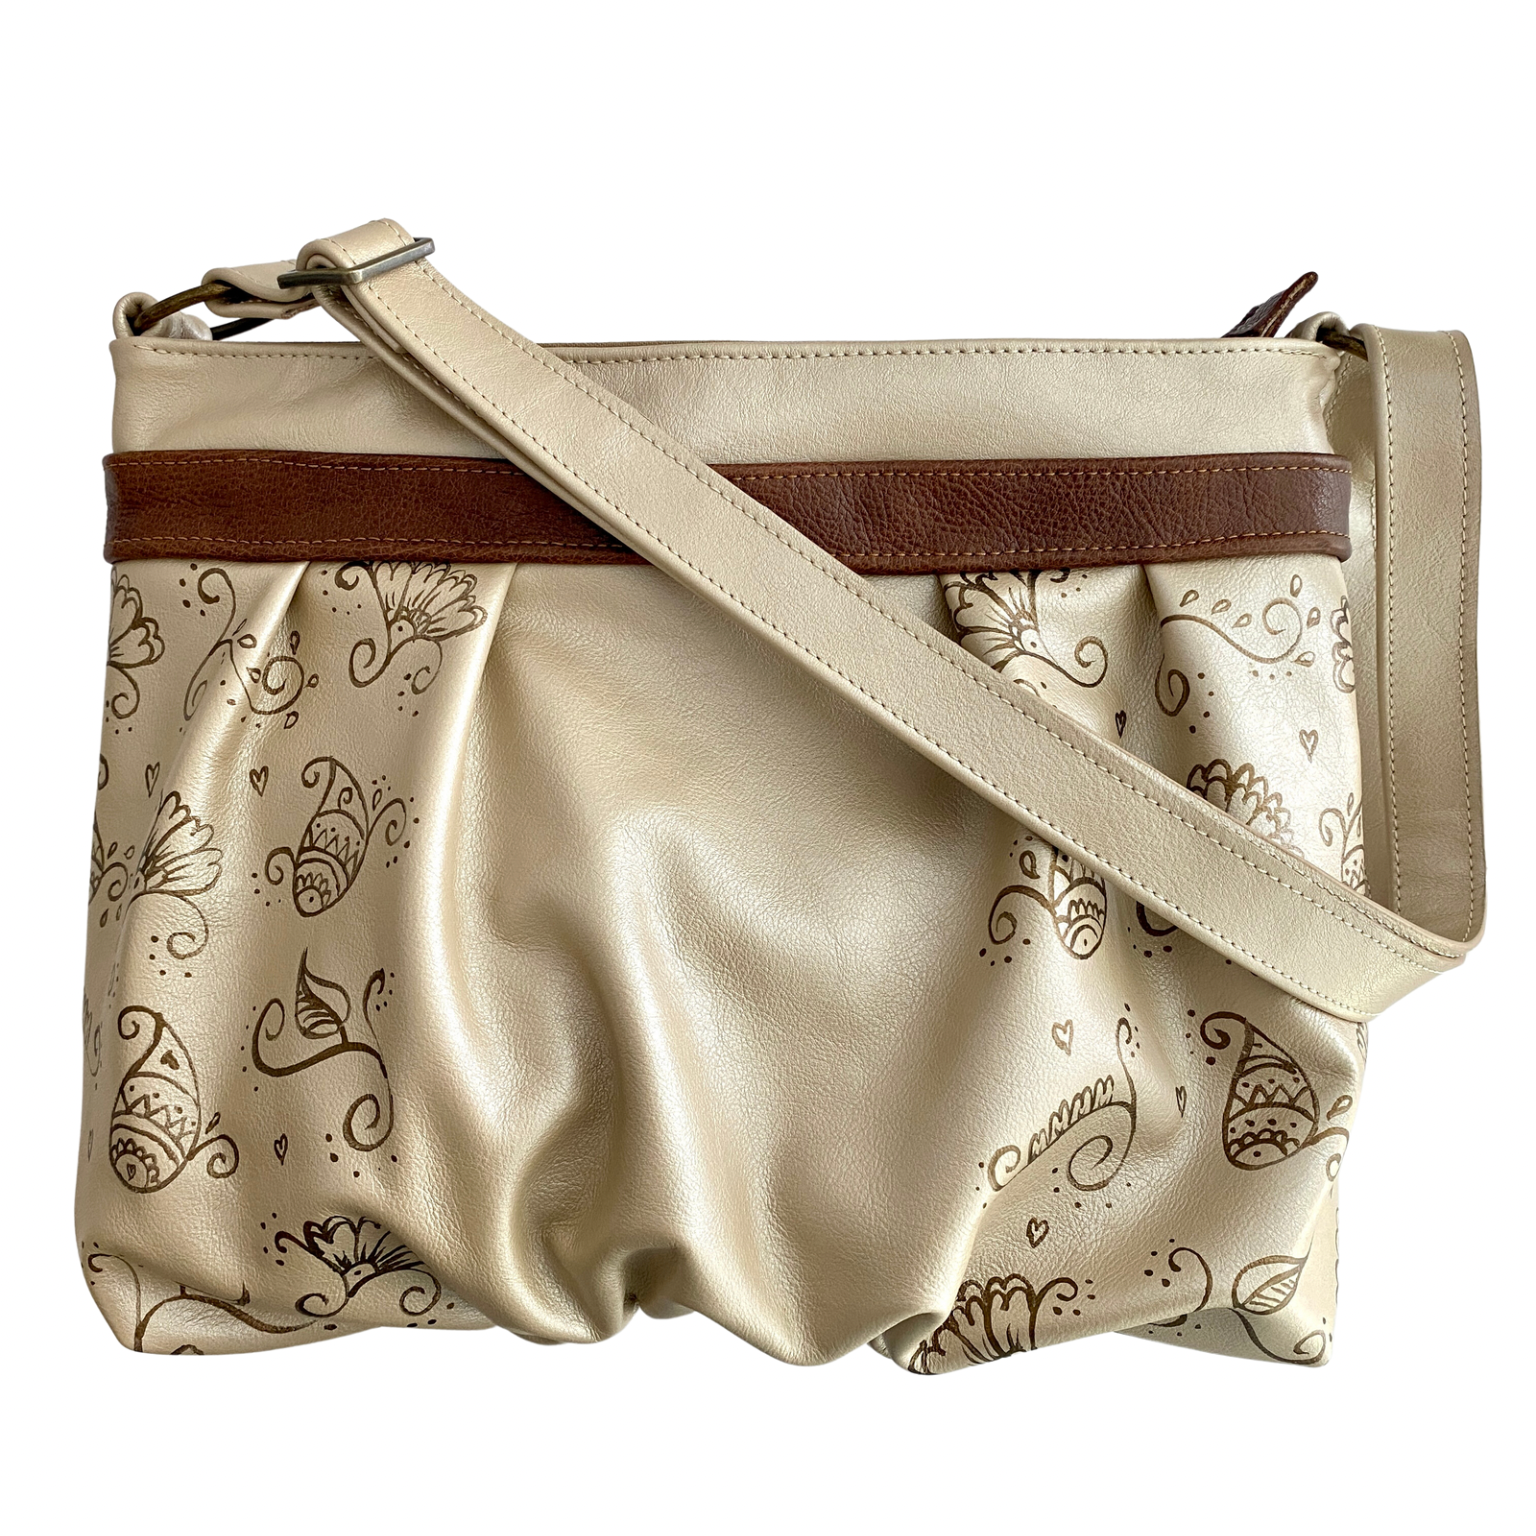 Ruche Mini in Pearl, Chestnut, Handpainted Floral, RTS